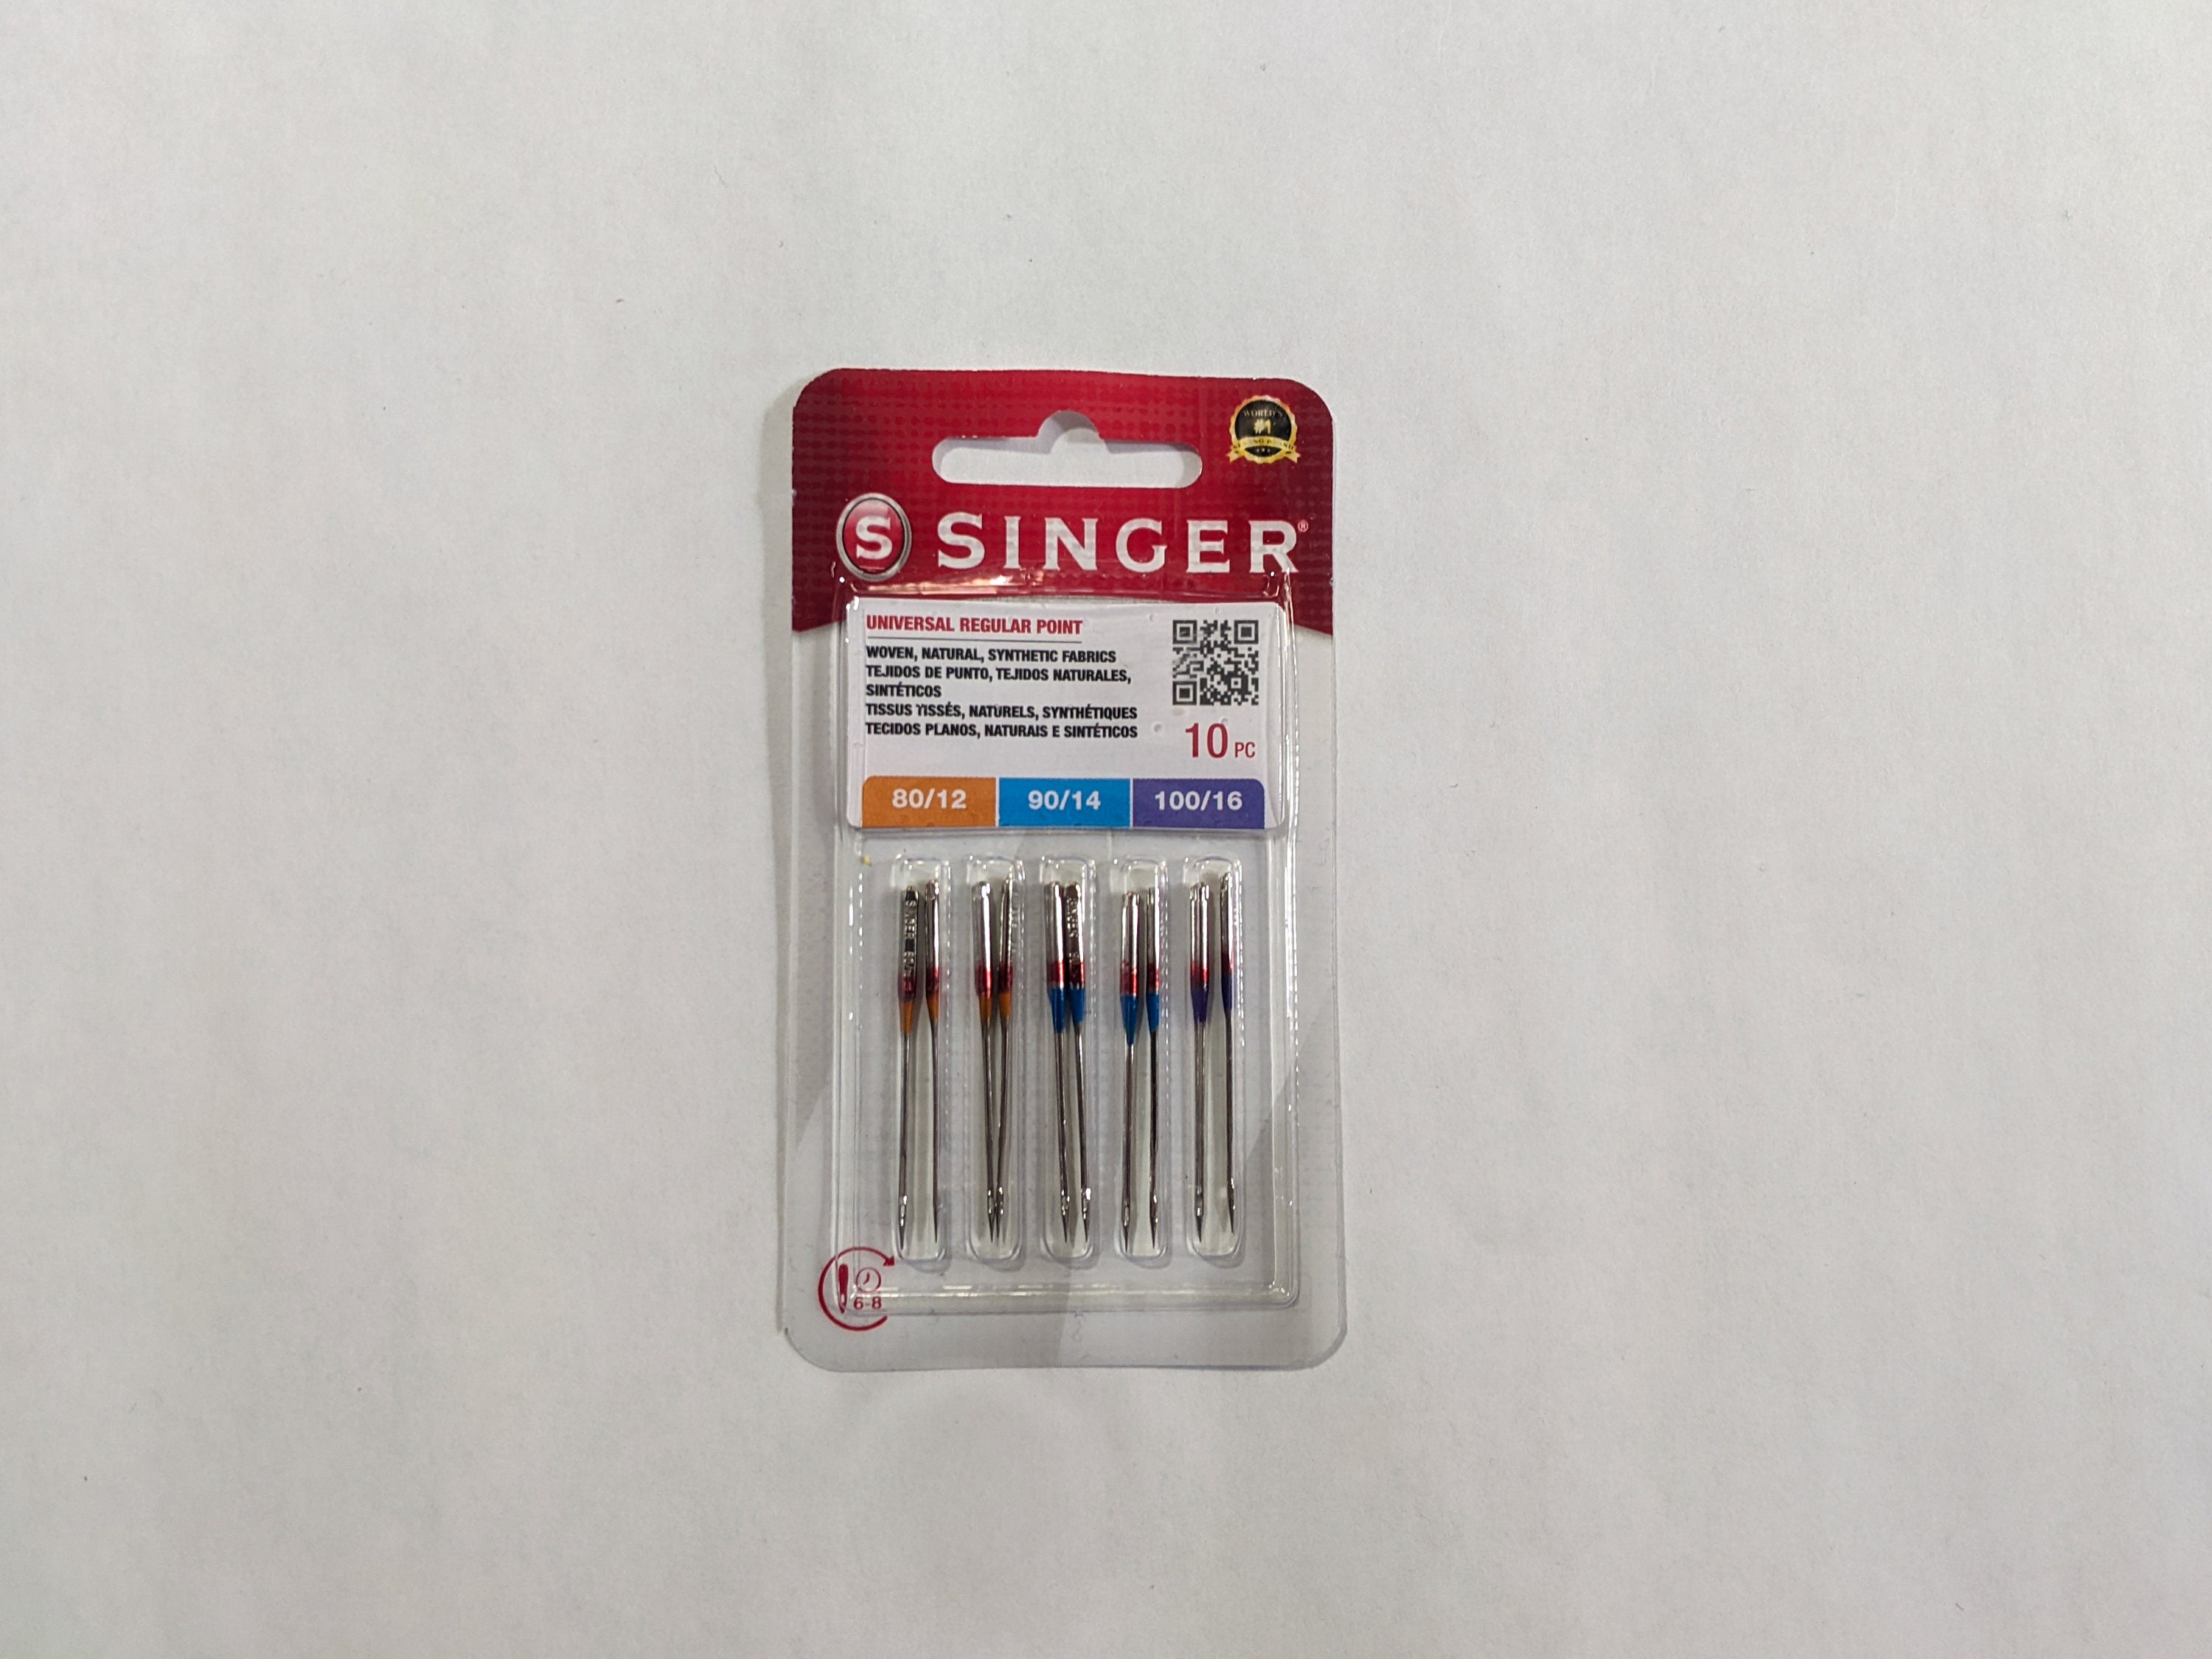 Singer Universal Heavy Duty Machine Needles. Assorted. 5 Needles: Two  100/16, Two 110/18, and One 90/14 04801 